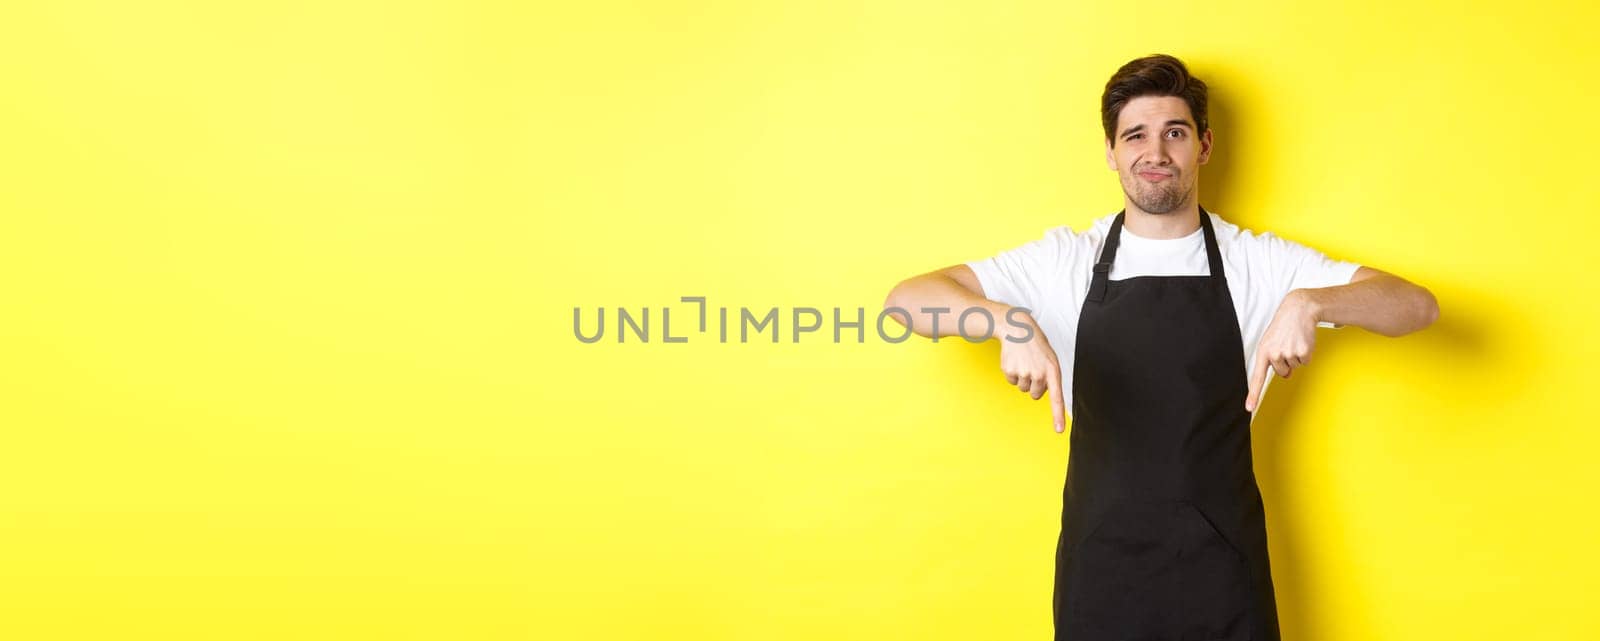 Skeptical barista in black apron pointing fingers down at bad product, looking displeased and unamused, standing over yellow background.